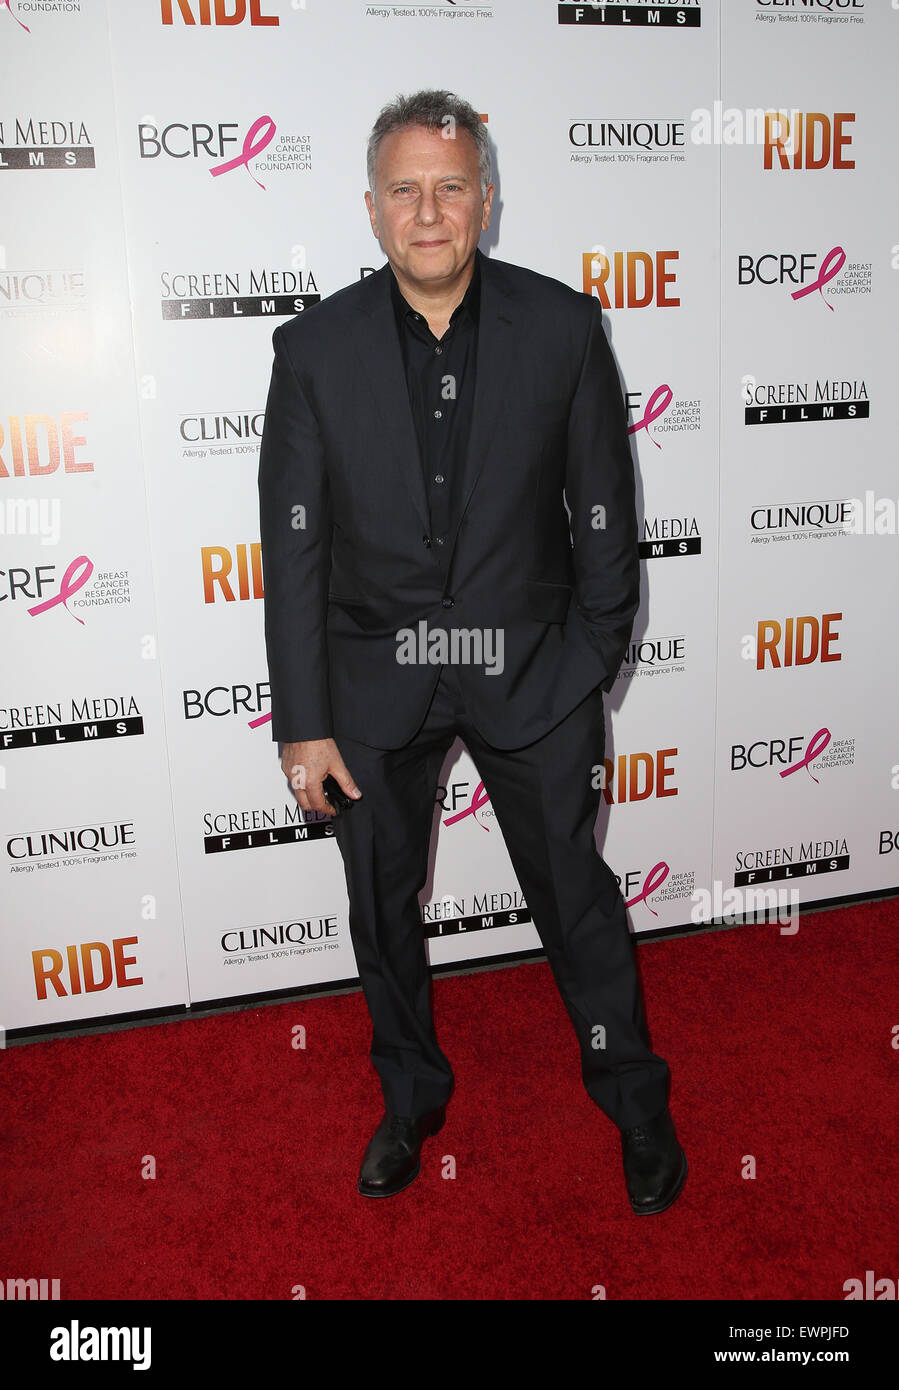 Ride Los Angeles Premiere  Featuring: Paul Reiser Where: Hollywood, California, United States When: 29 Apr 2015 Stock Photo